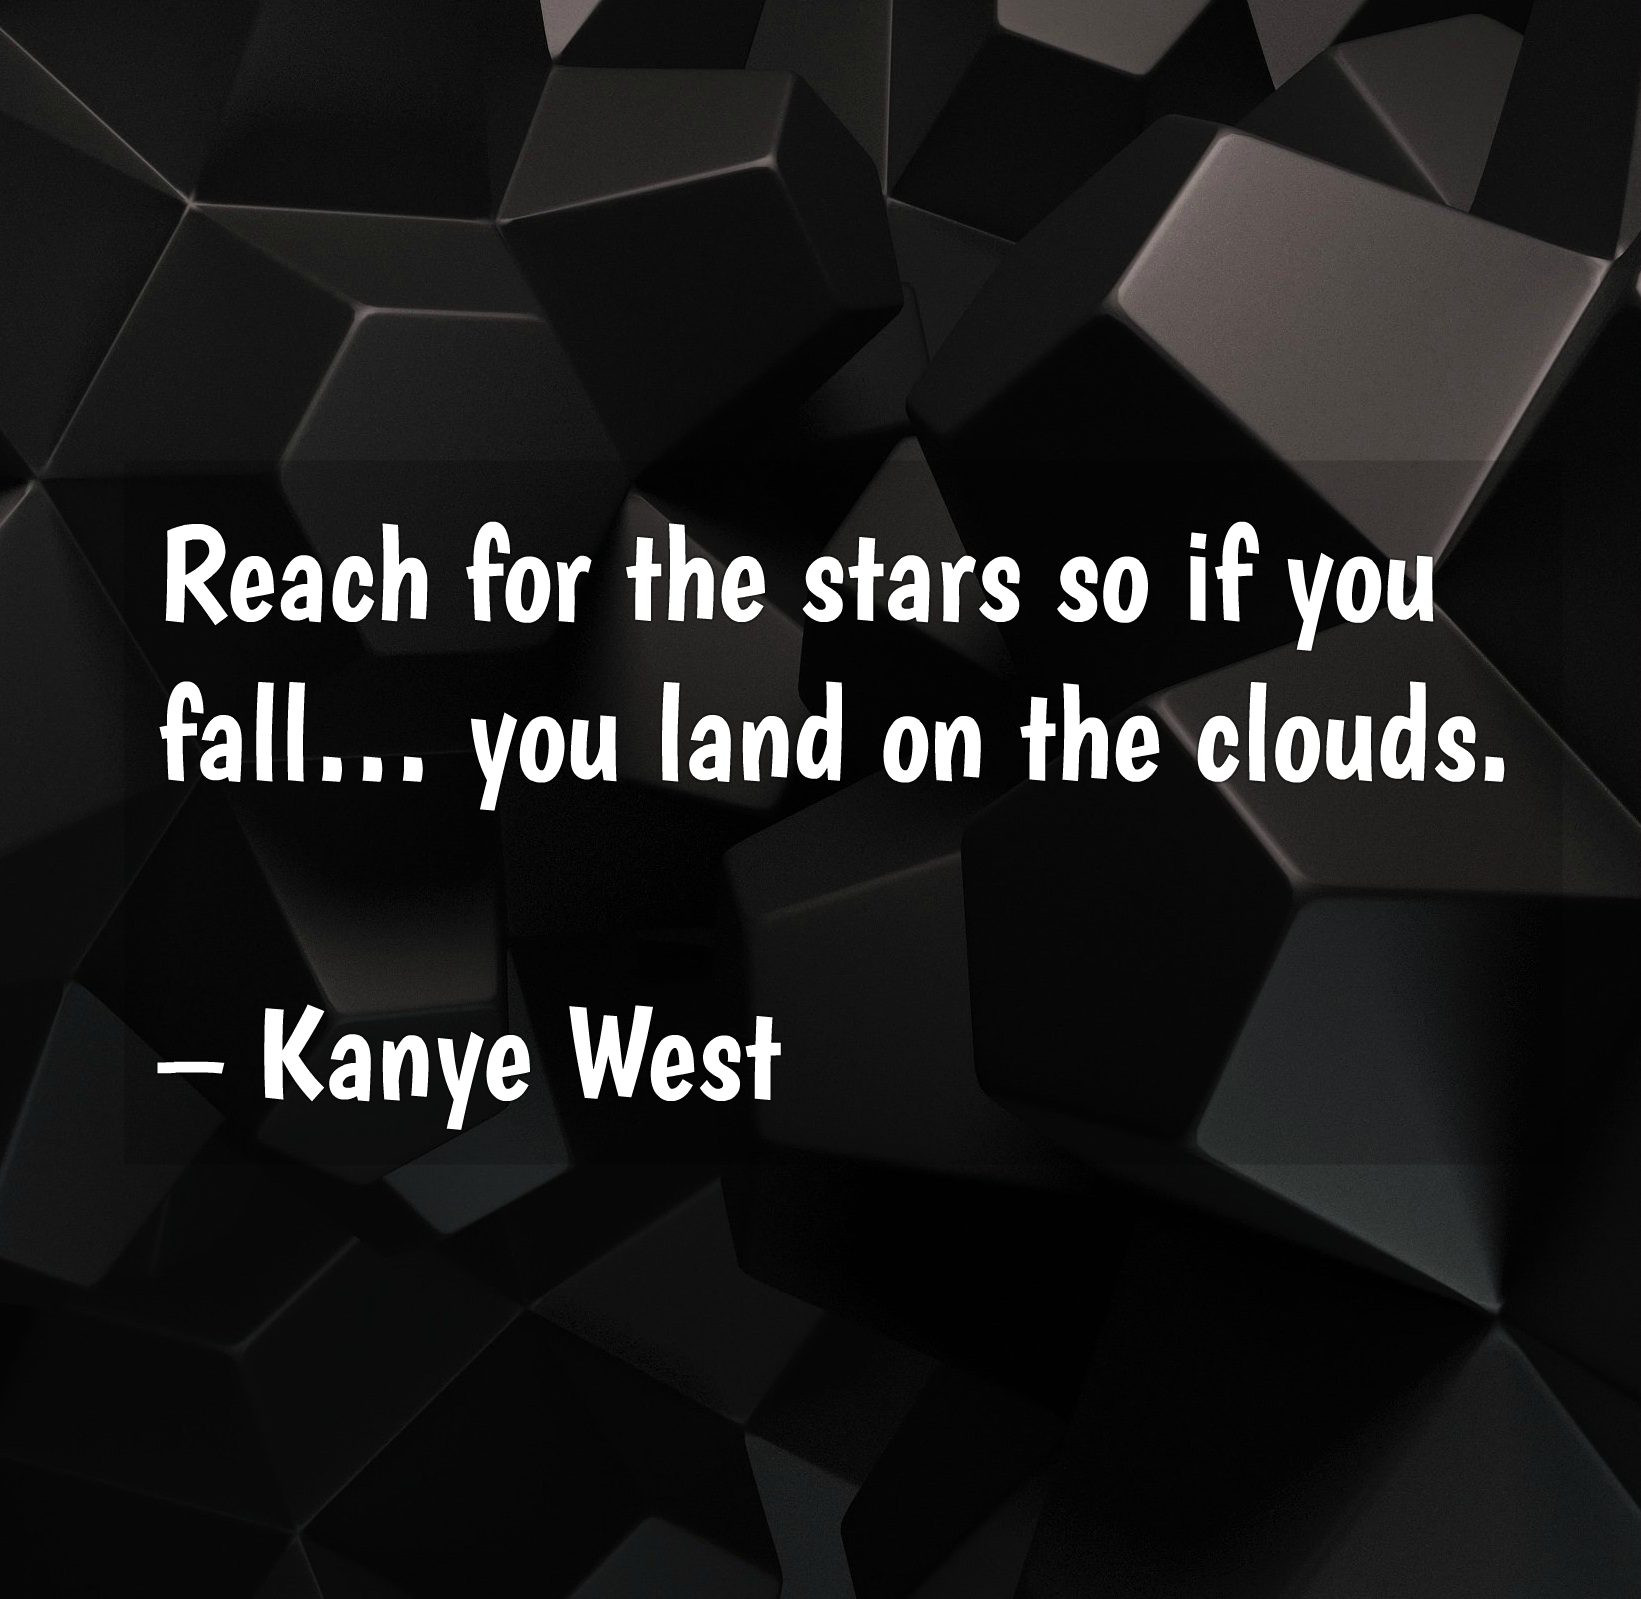 Motivational Rap Quotes
 10 Inspirational Rap Quotes To Help You Reach Your Goals